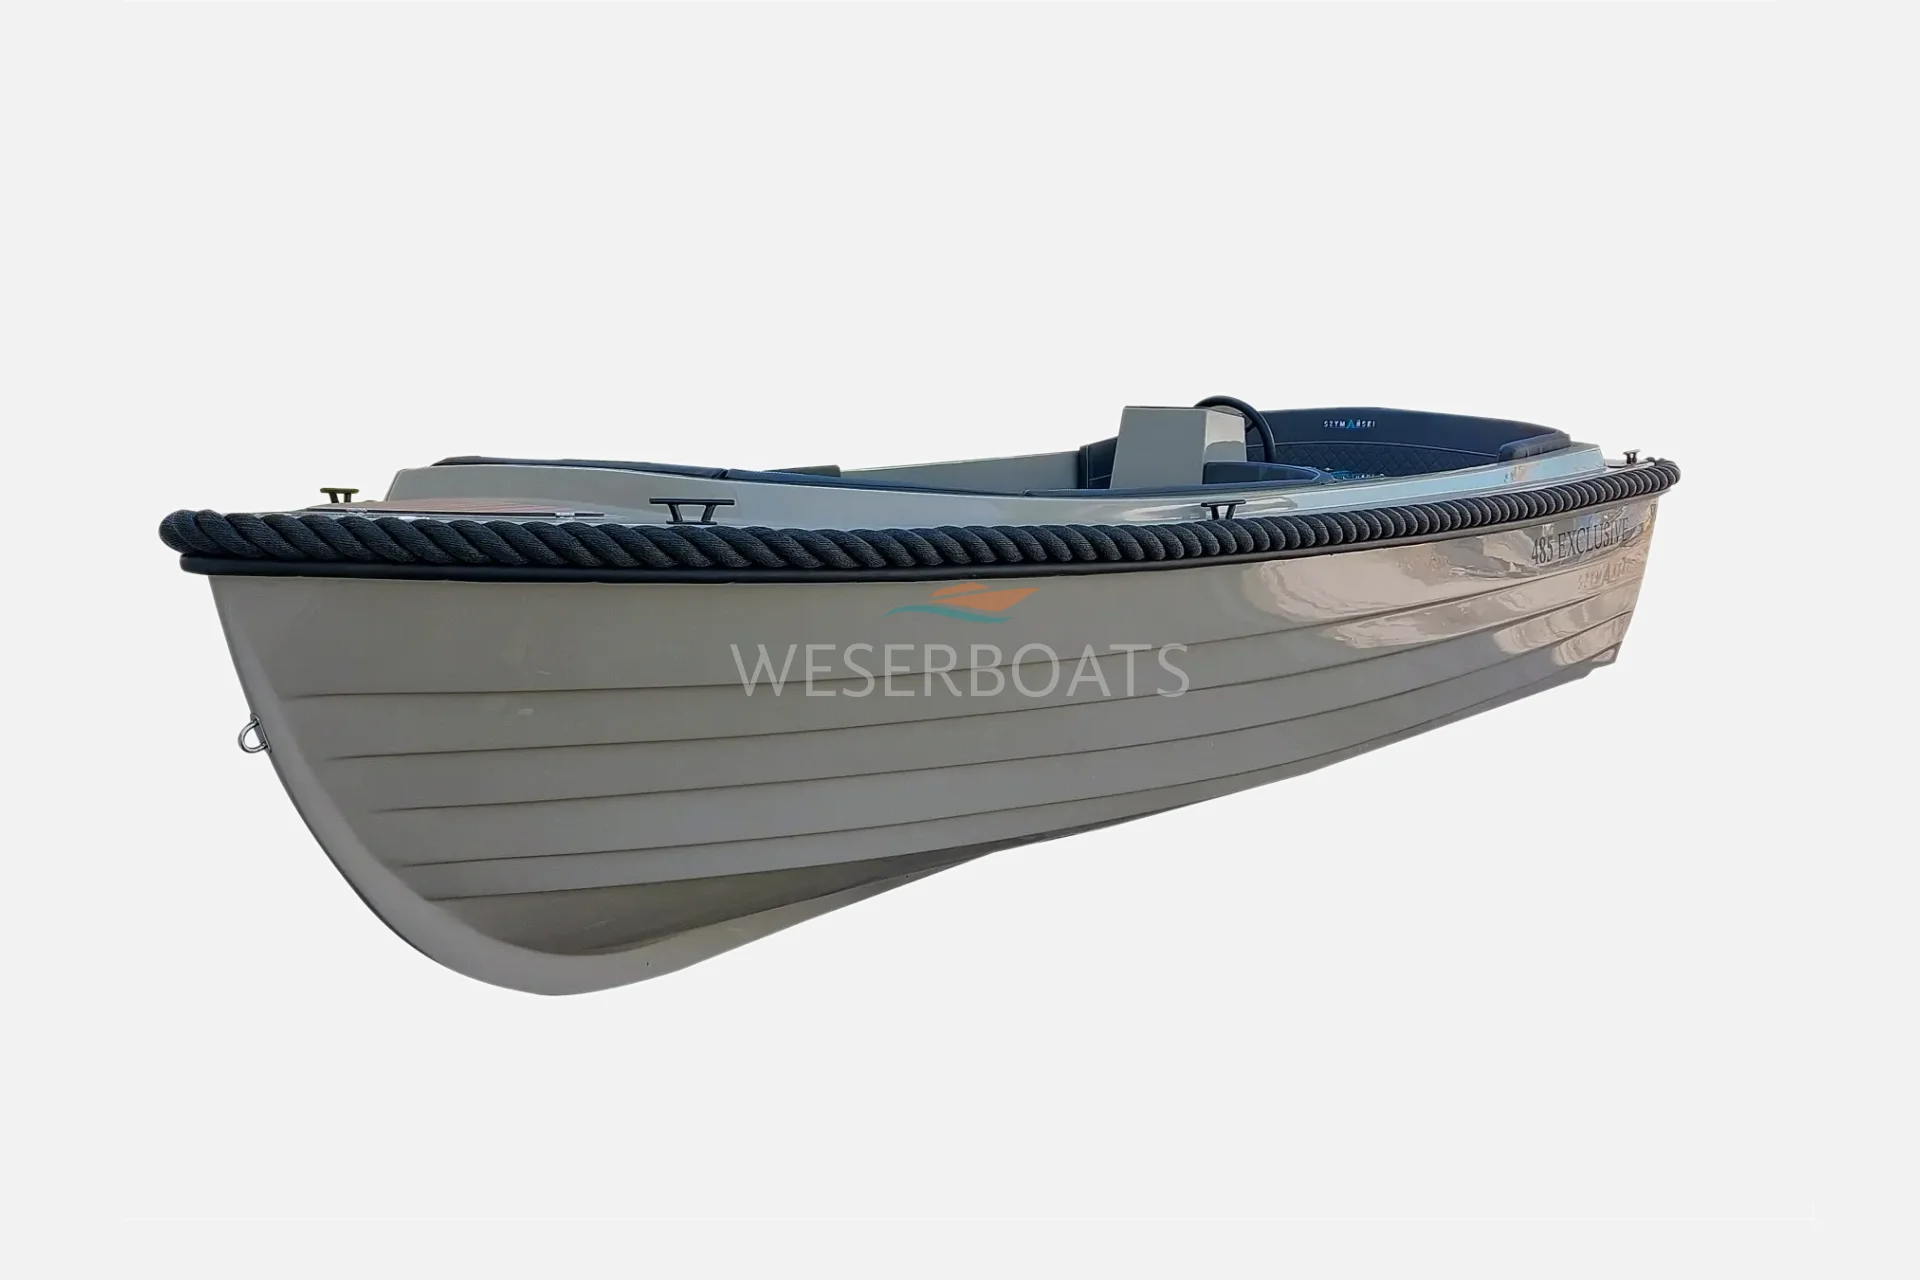 WESERBOATS